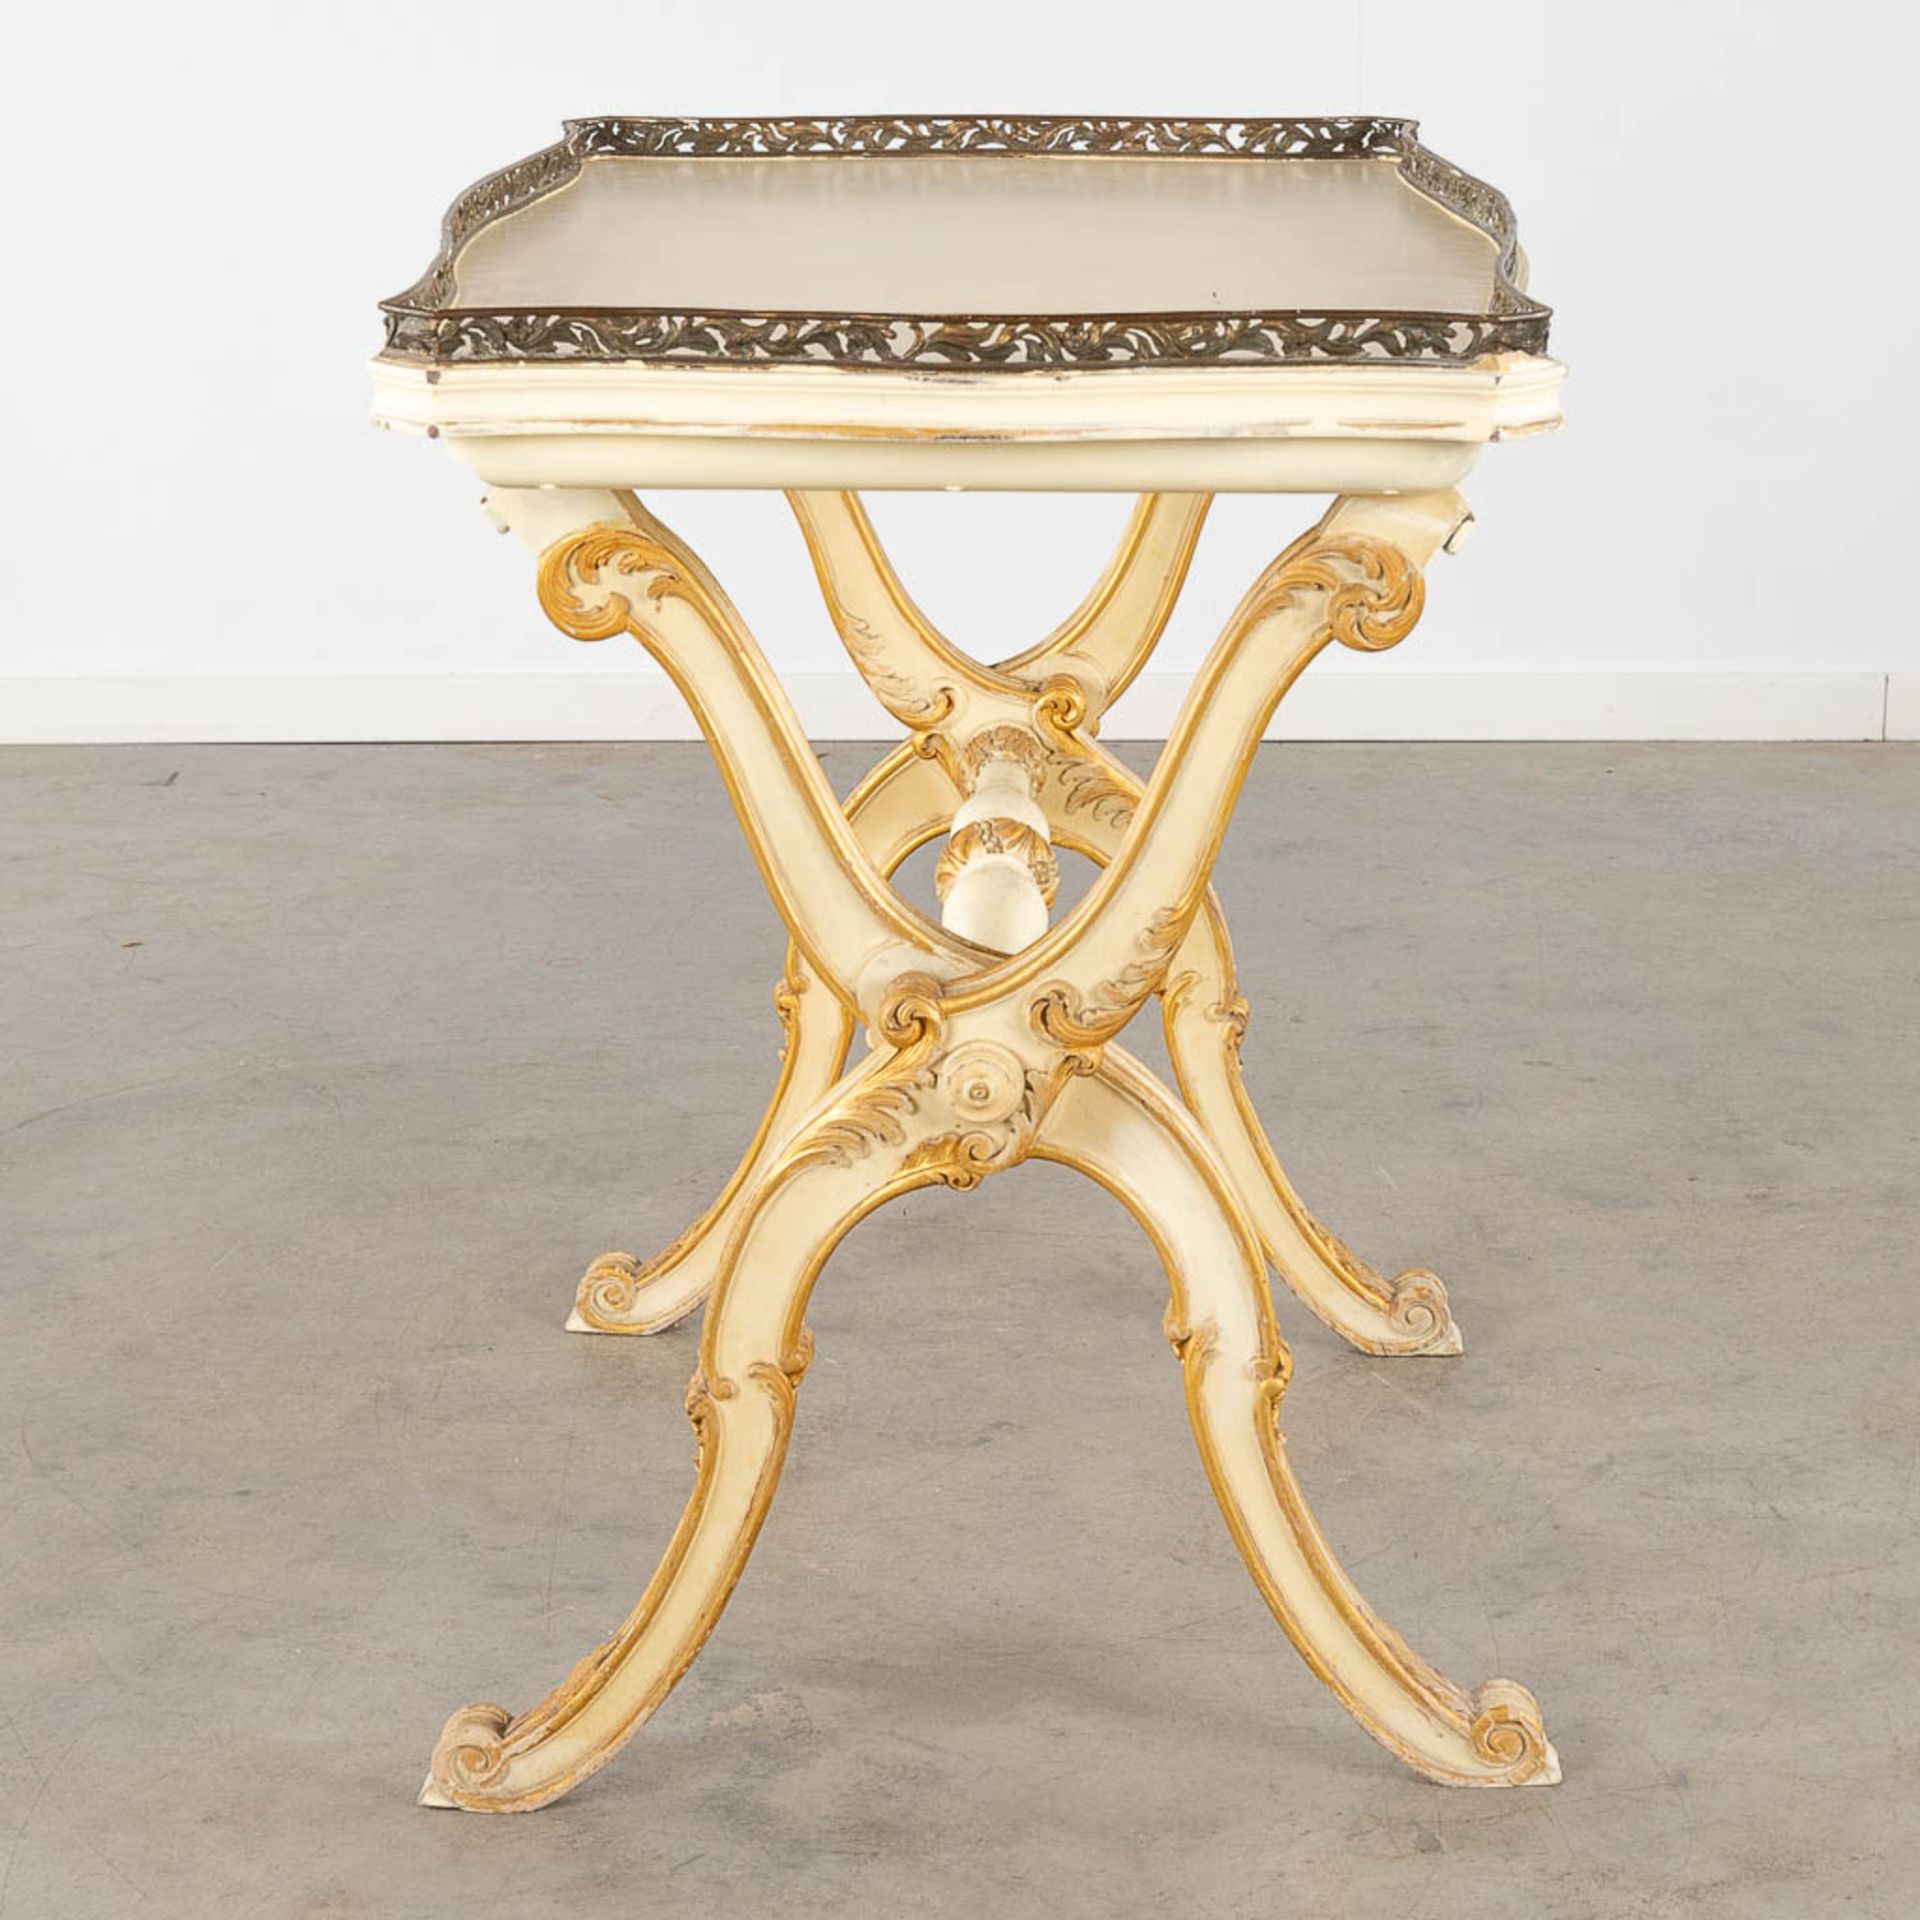 A serving table with bronze gallery, Italian style wood-sculptures. 19th C. (L:60 x W:89 x H:79 cm) - Bild 6 aus 14